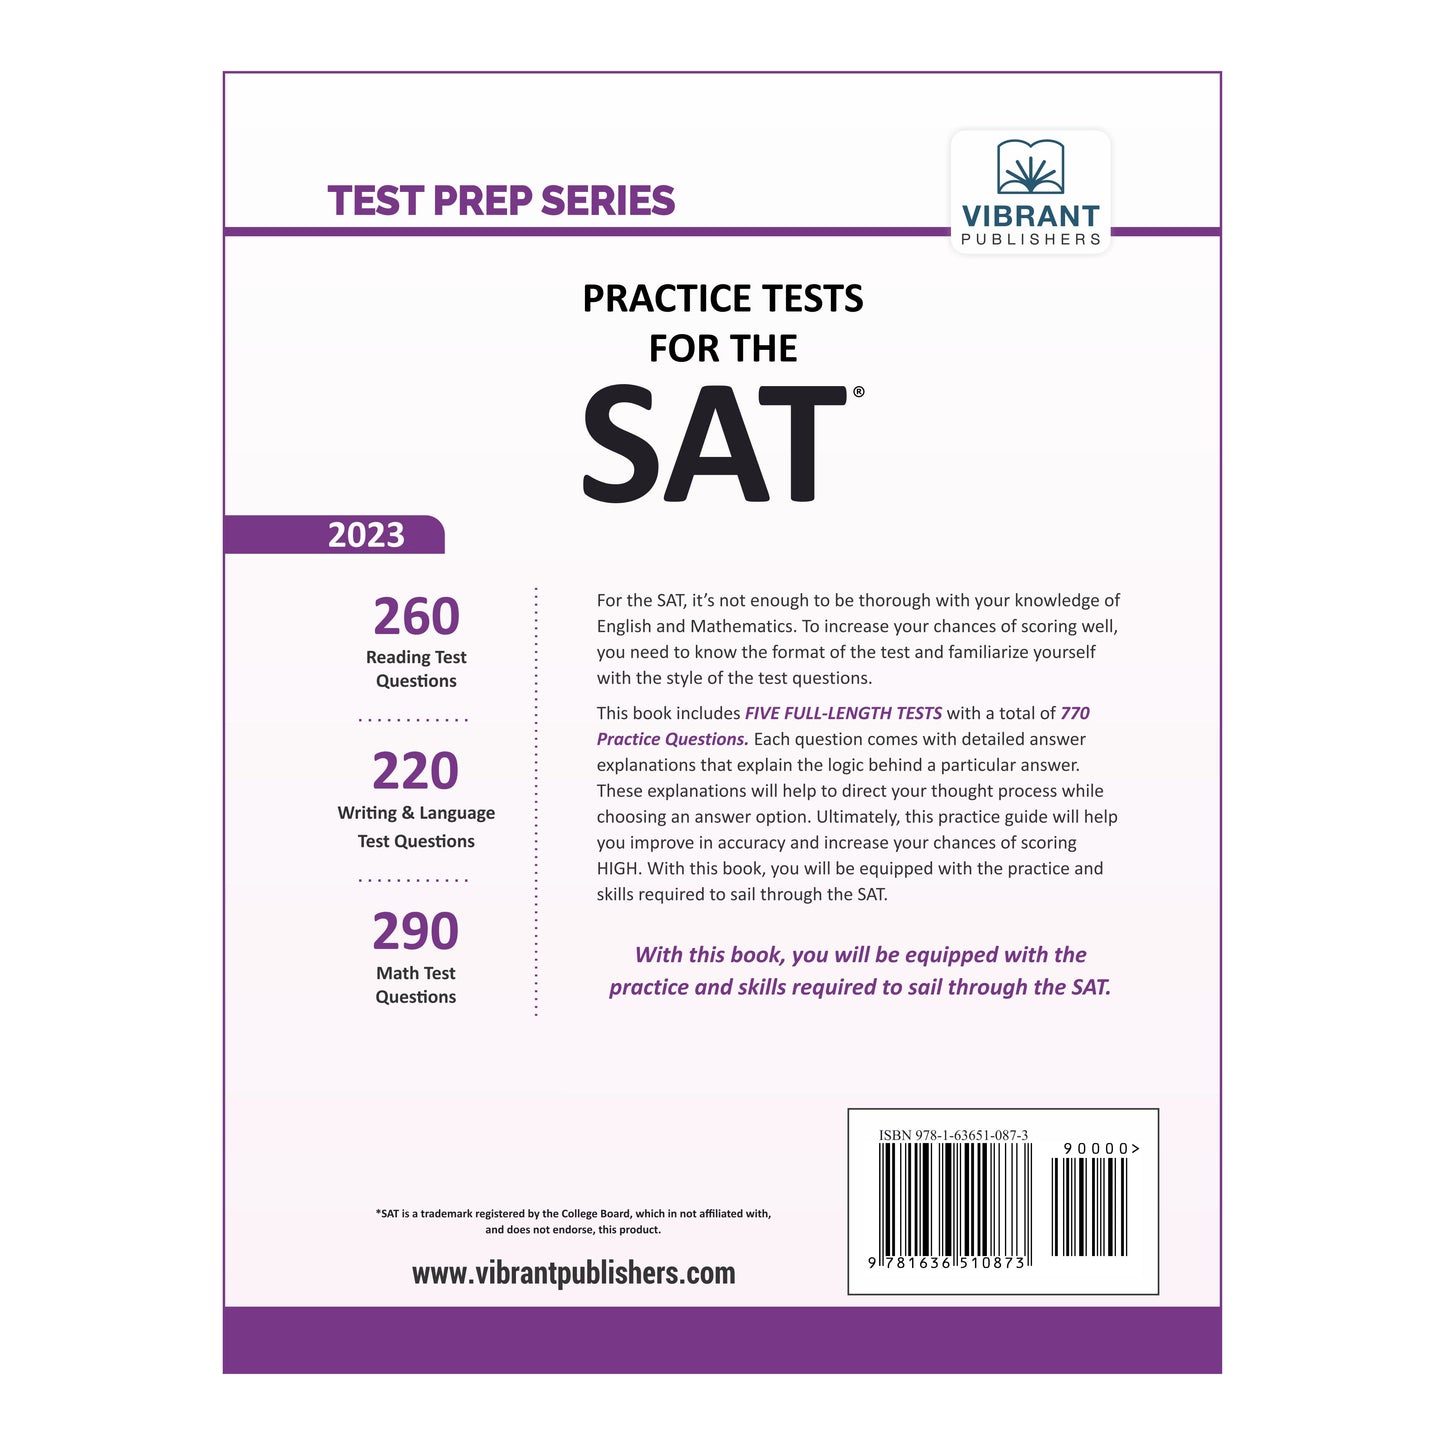 Practice Tests For The SAT